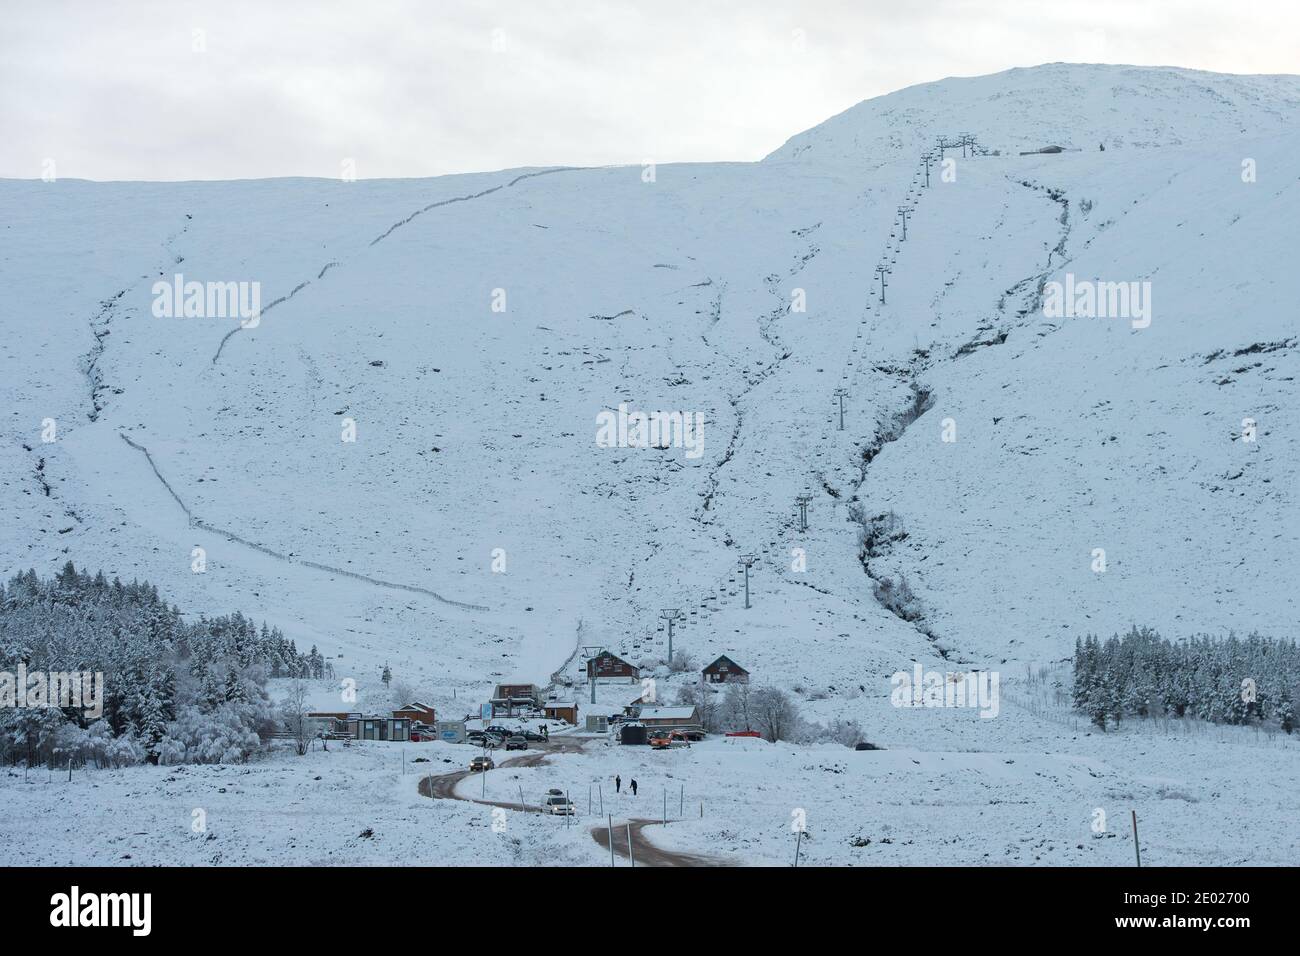 Glencoe, Scotland, UK. 28th Dec, 2020. Pictured: Snow covered highland landscape at Glencoe Ski Resort. Snow still lying on the hills from overnight snow fall from Storm Bella. Freezing temperatures with a Yellow Warning still in place issued by the MET Office. Credit: Colin Fisher/Alamy Live News Stock Photo